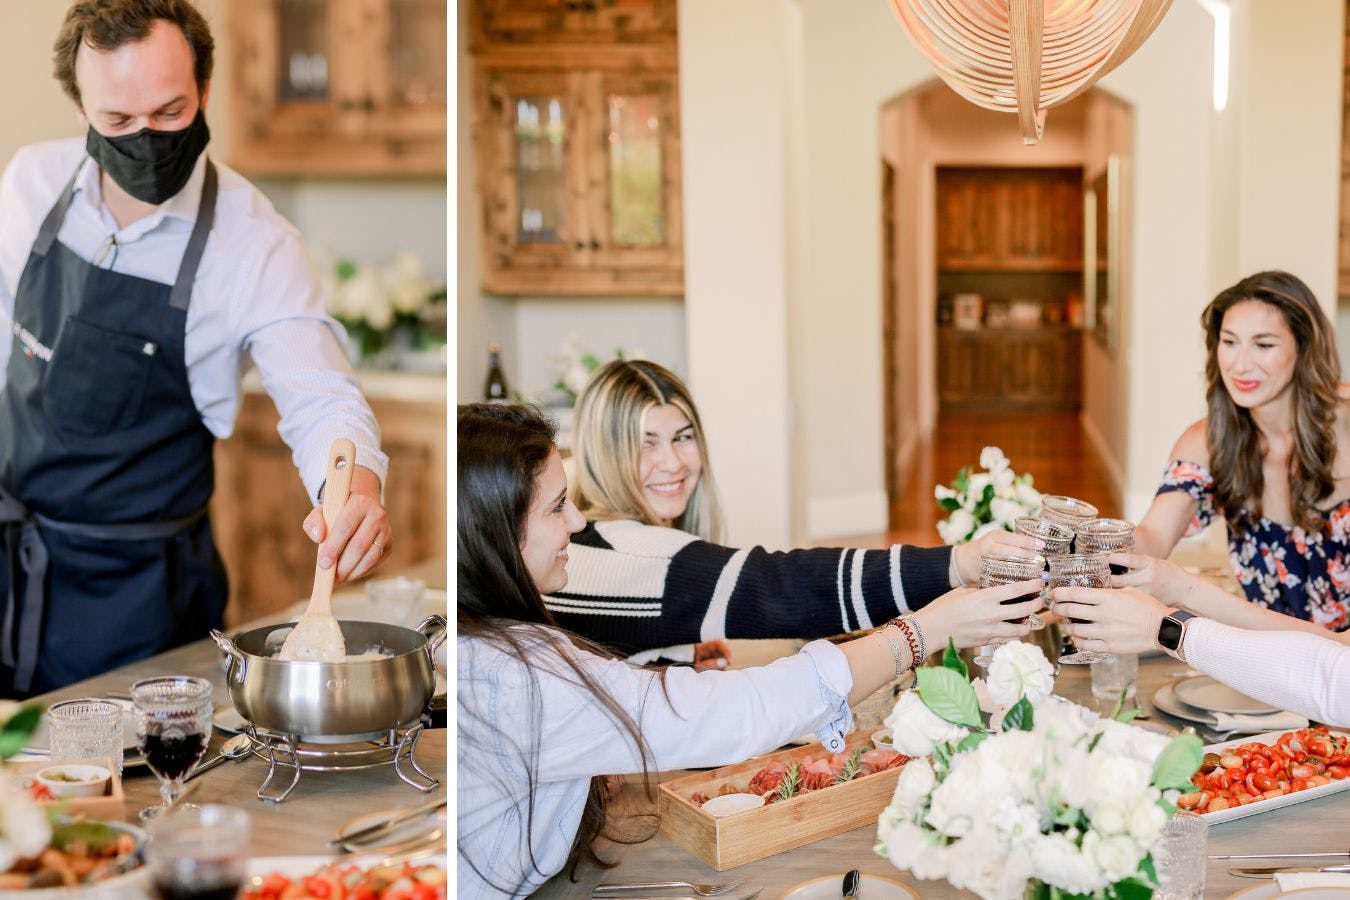 Dinner party with live chef | PartySlate